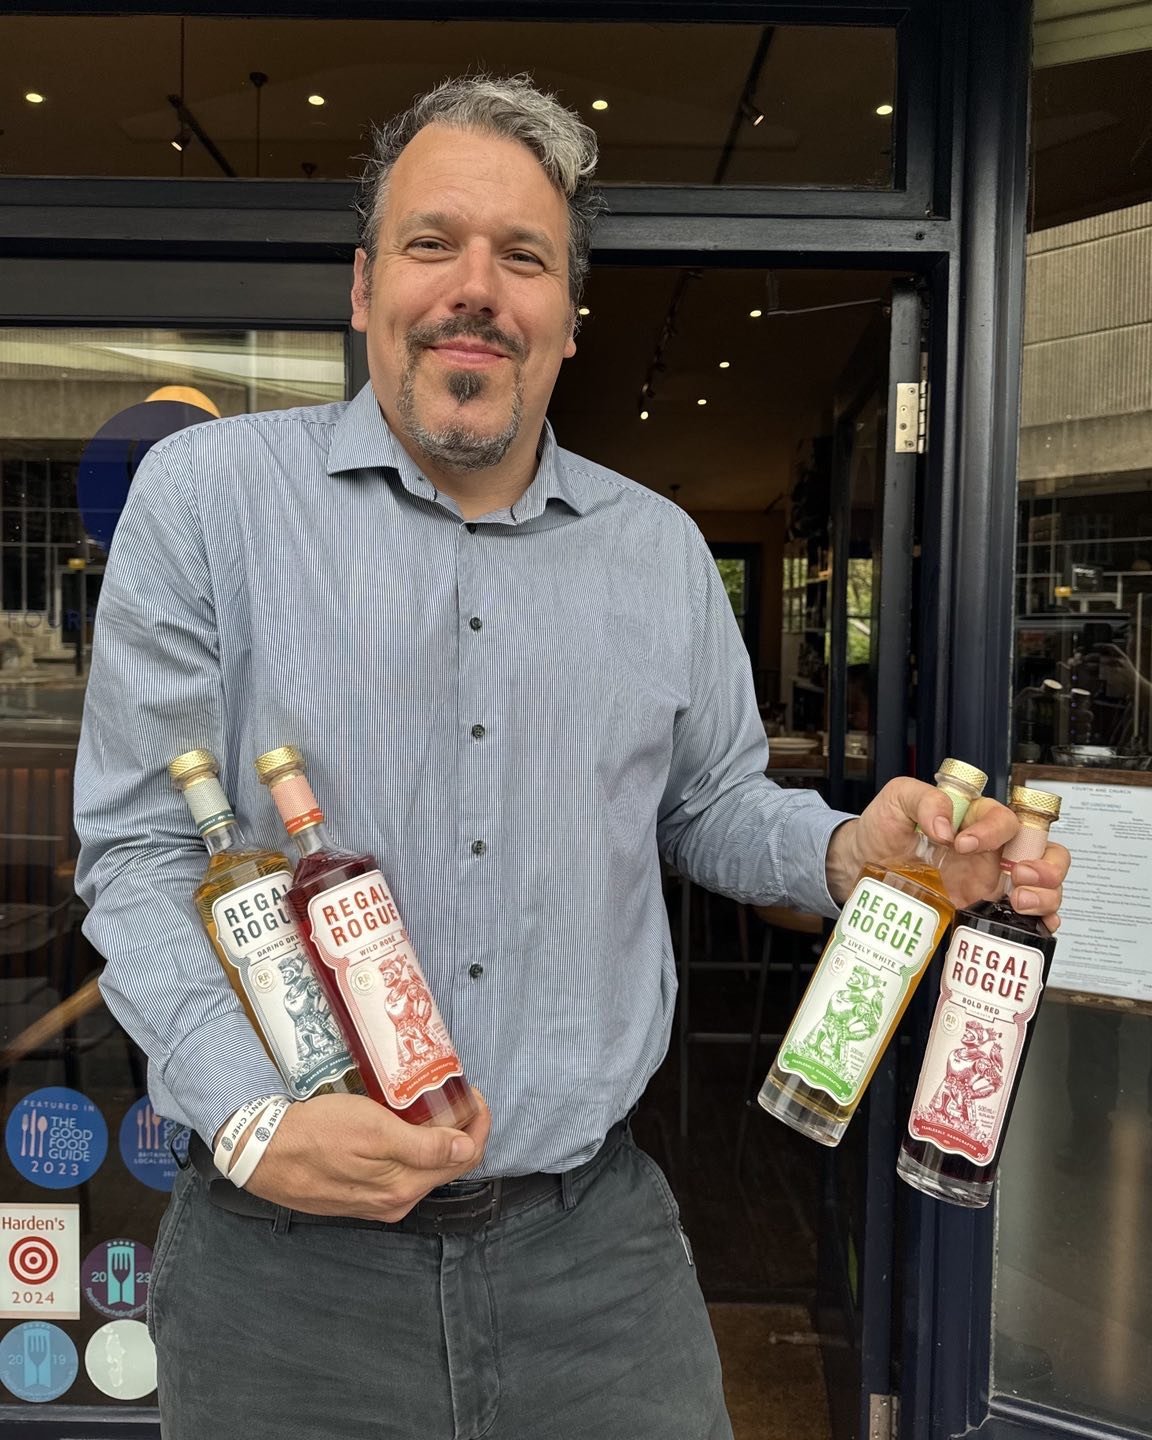 Join us on Thursday 23rd May for an exciting  Barstool Session with our friends at  @regalrogue Vermouth!

This unique range of Vermouth is led by the marriage of 100% organic Australian wine and Aboriginal herbs and spices, sourced directly from Abo